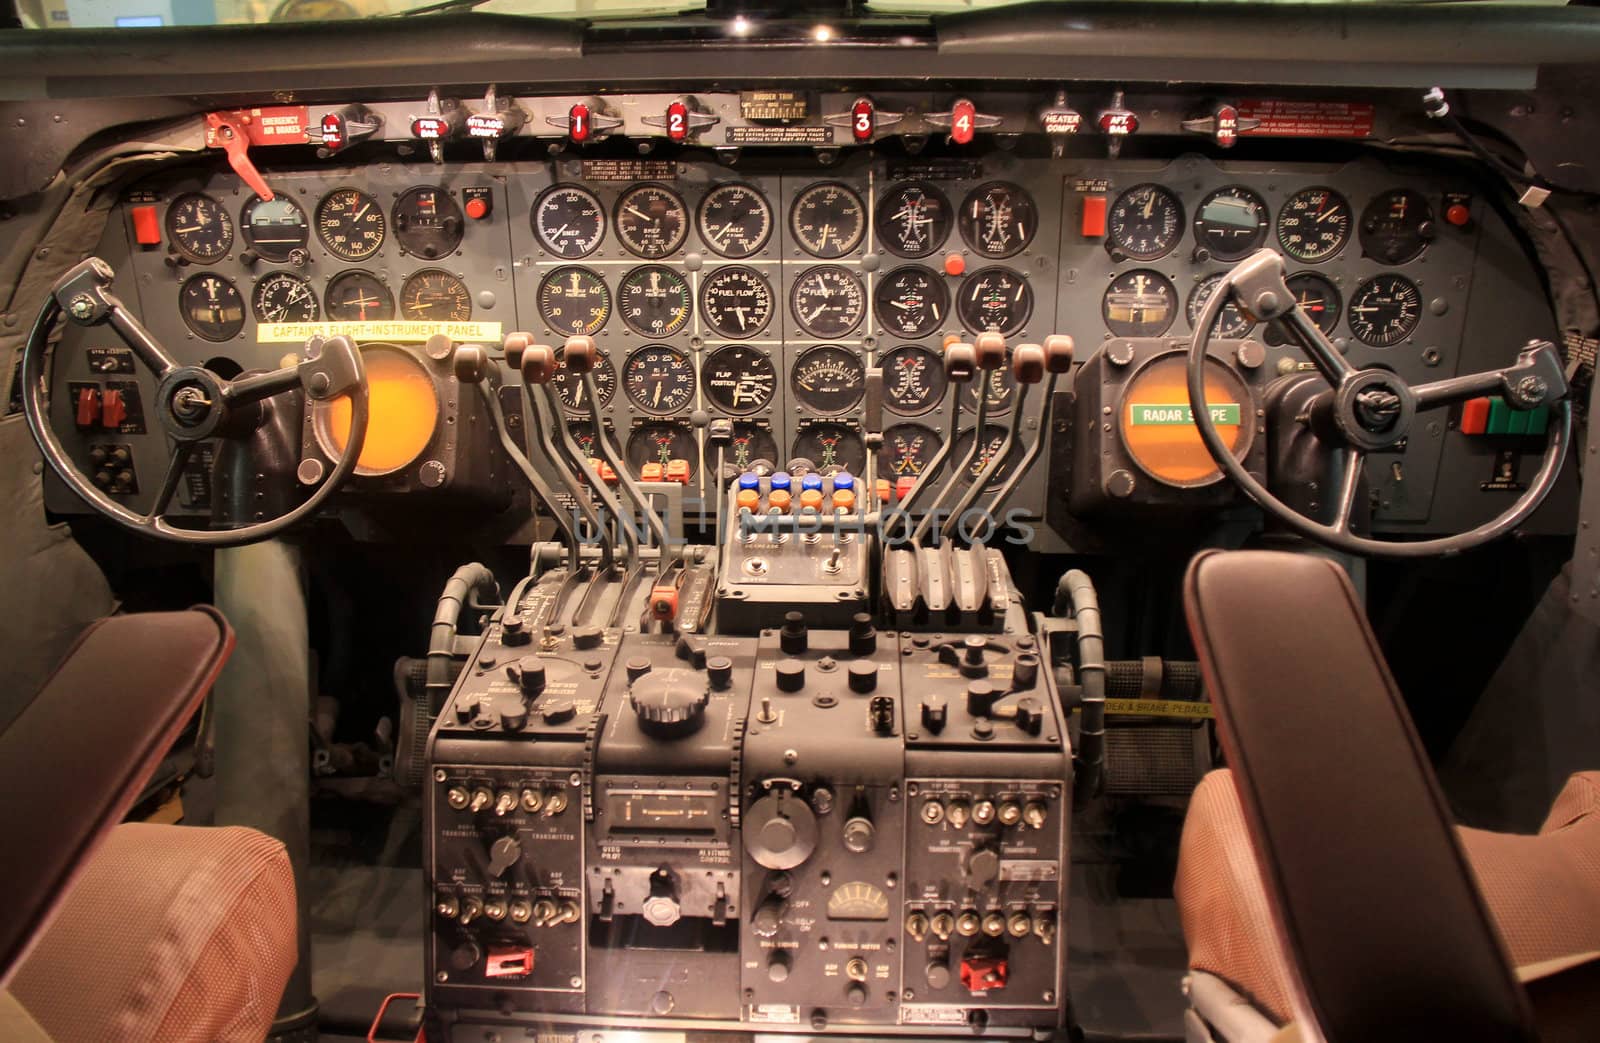 Detailed control panel of old aircraft.